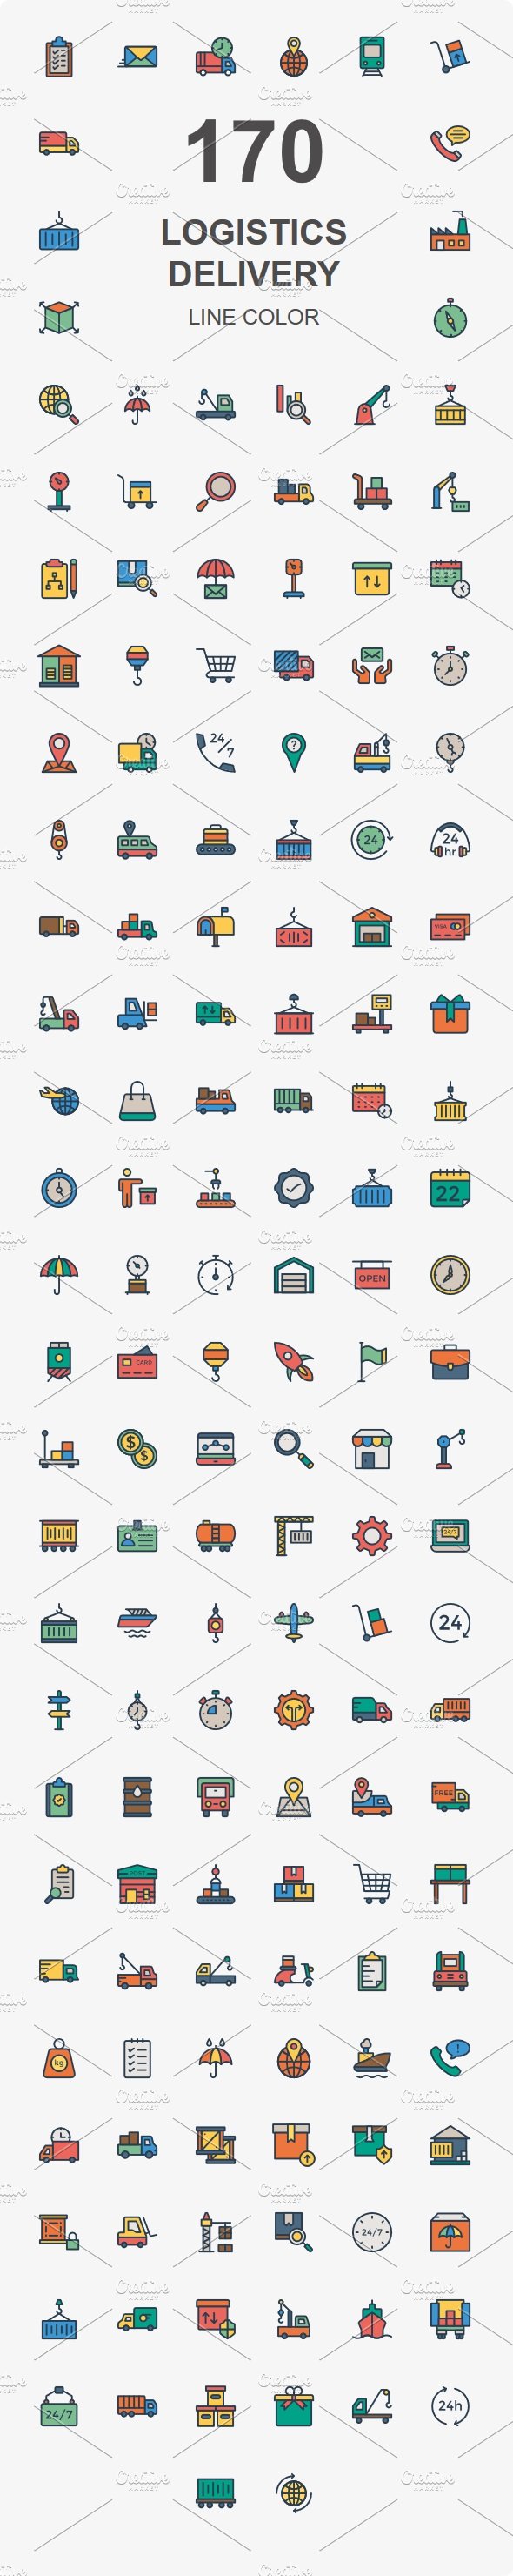 Logistic Delivery line color icons cover image.